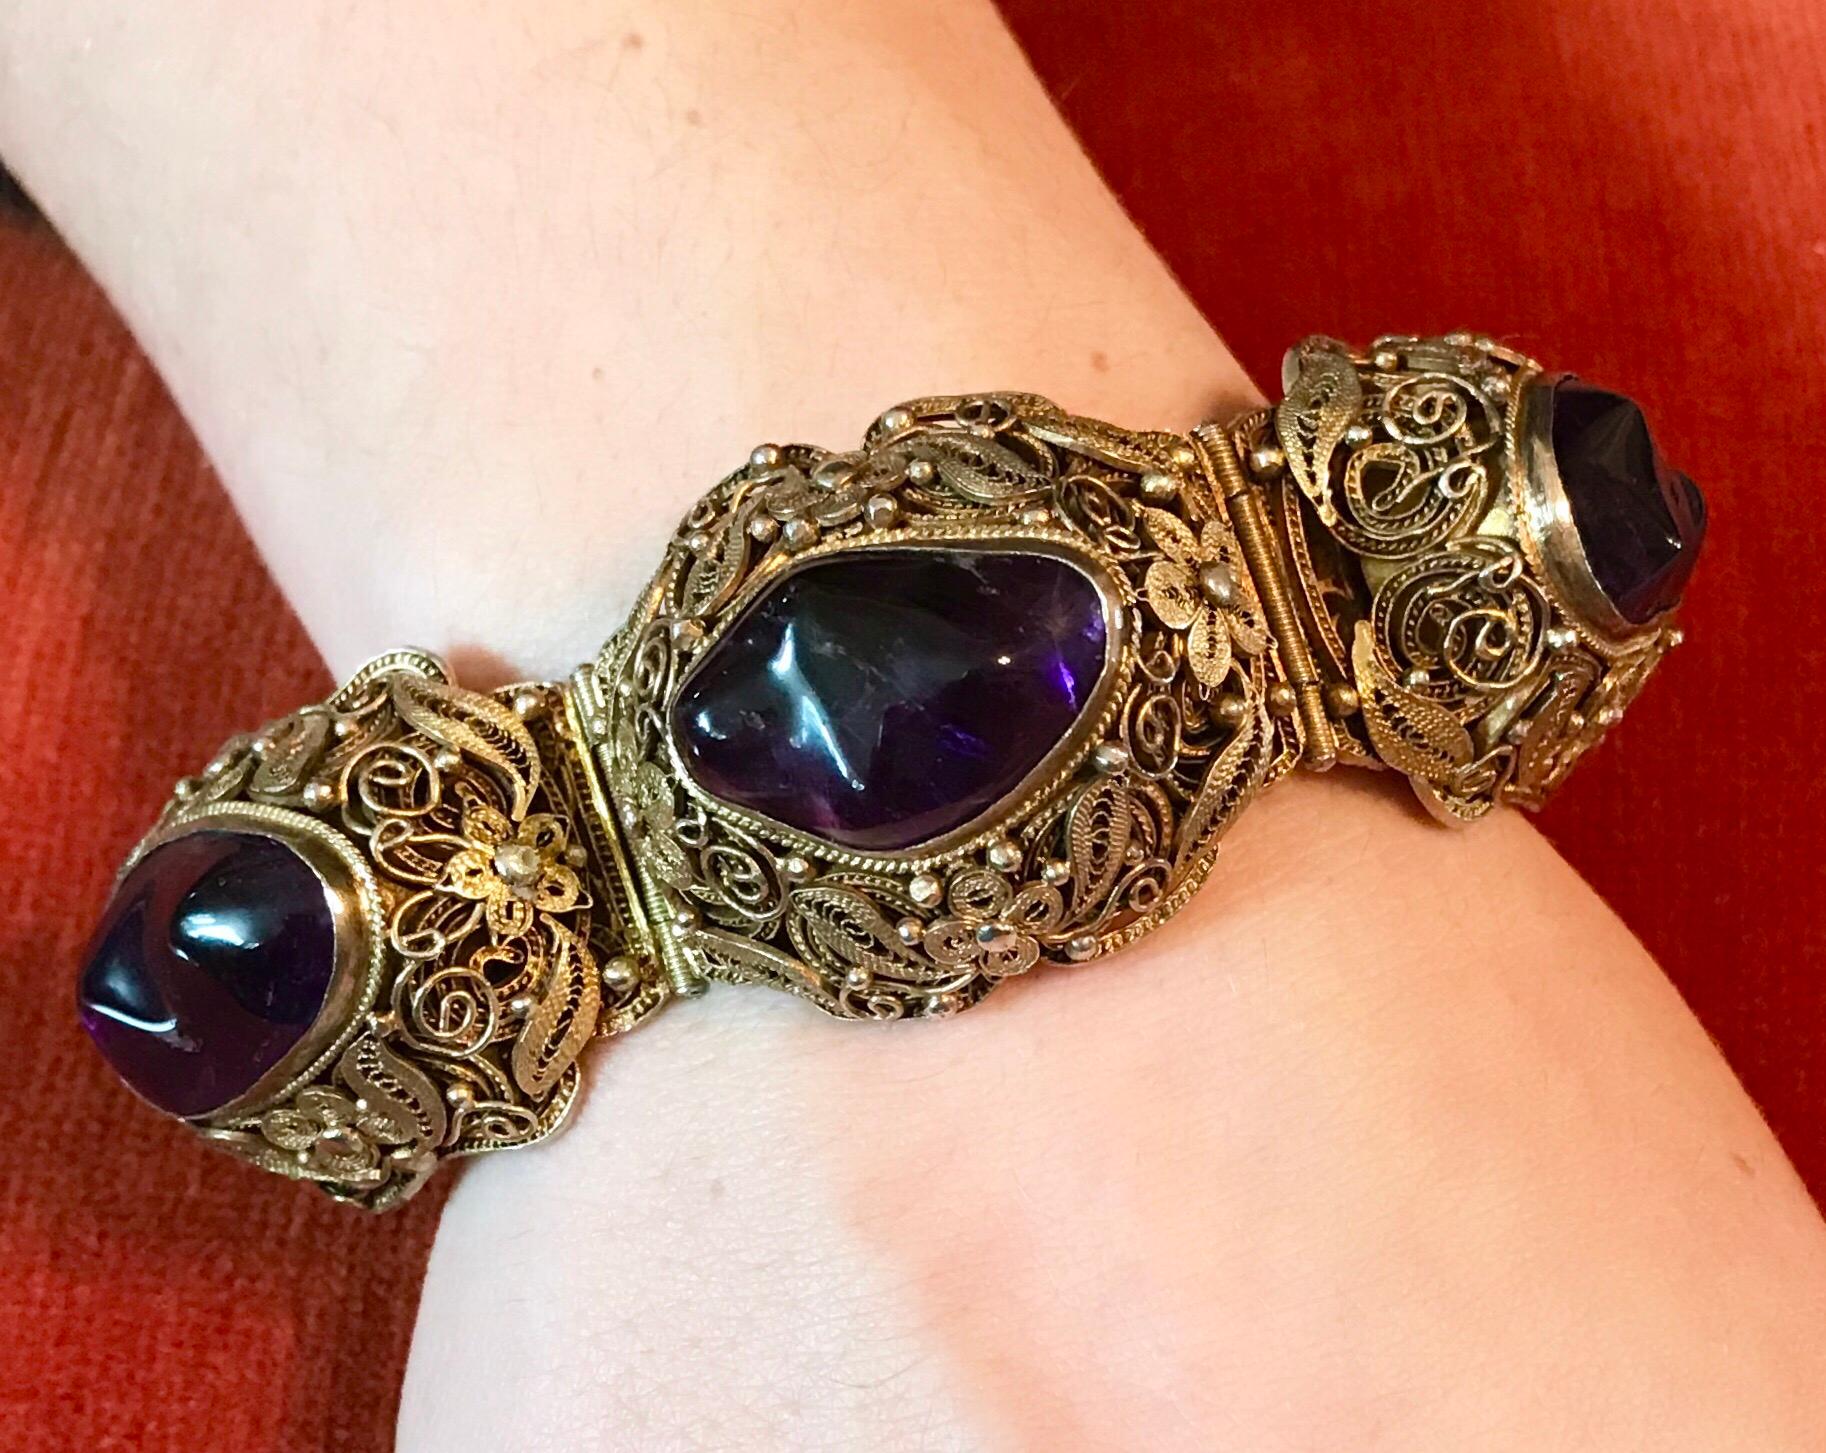 Circa 1940s Chinese Gold-Plated Sterling Silver Amethyst Bracelet For Sale 1